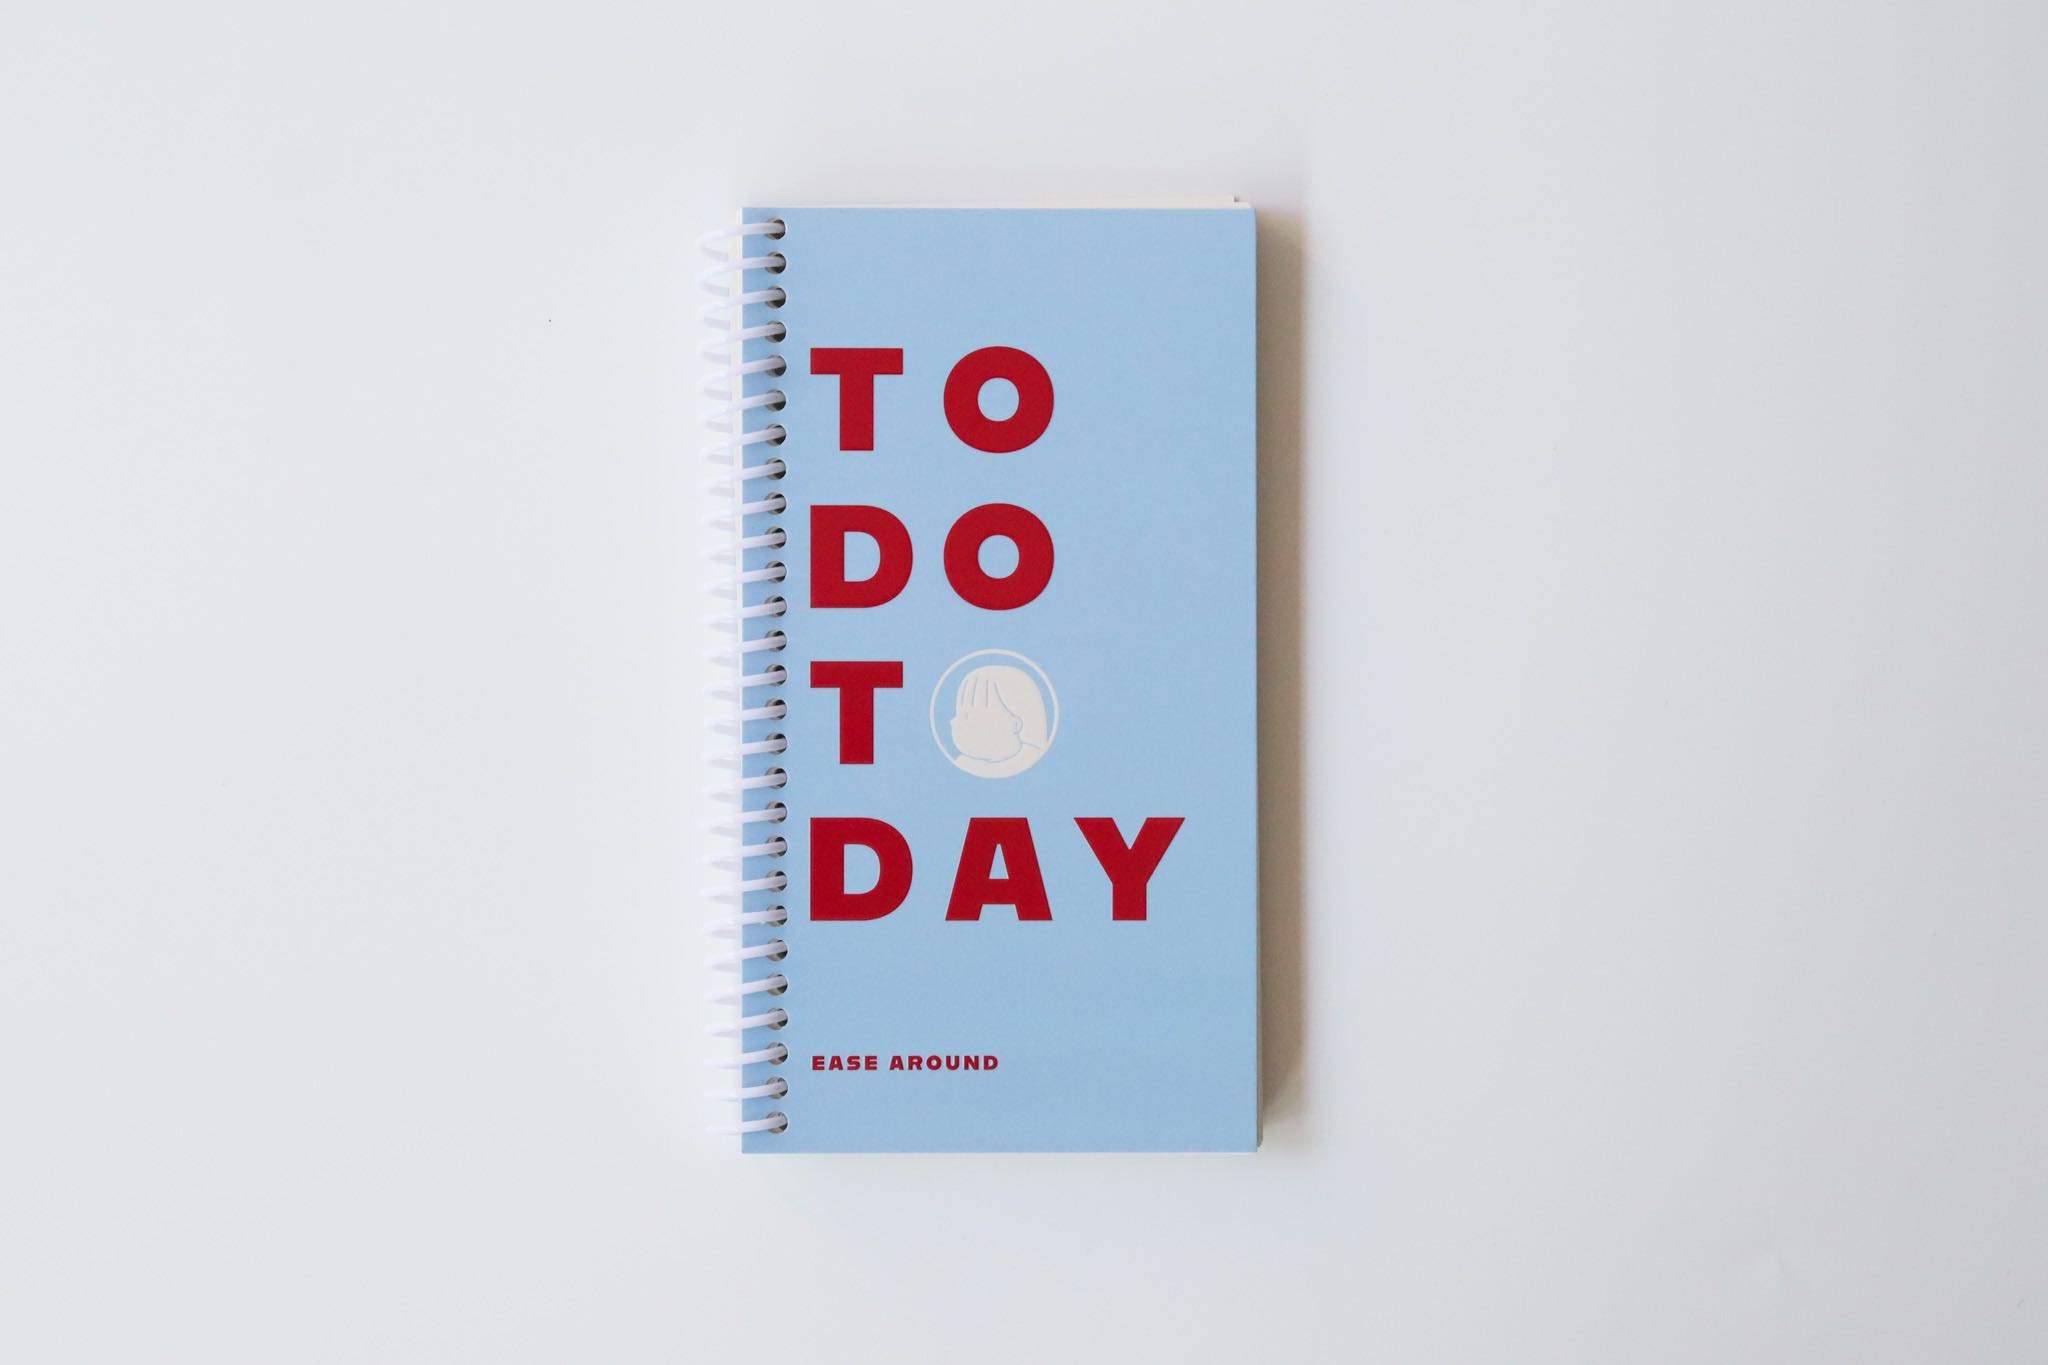 TO DO TODAY 02